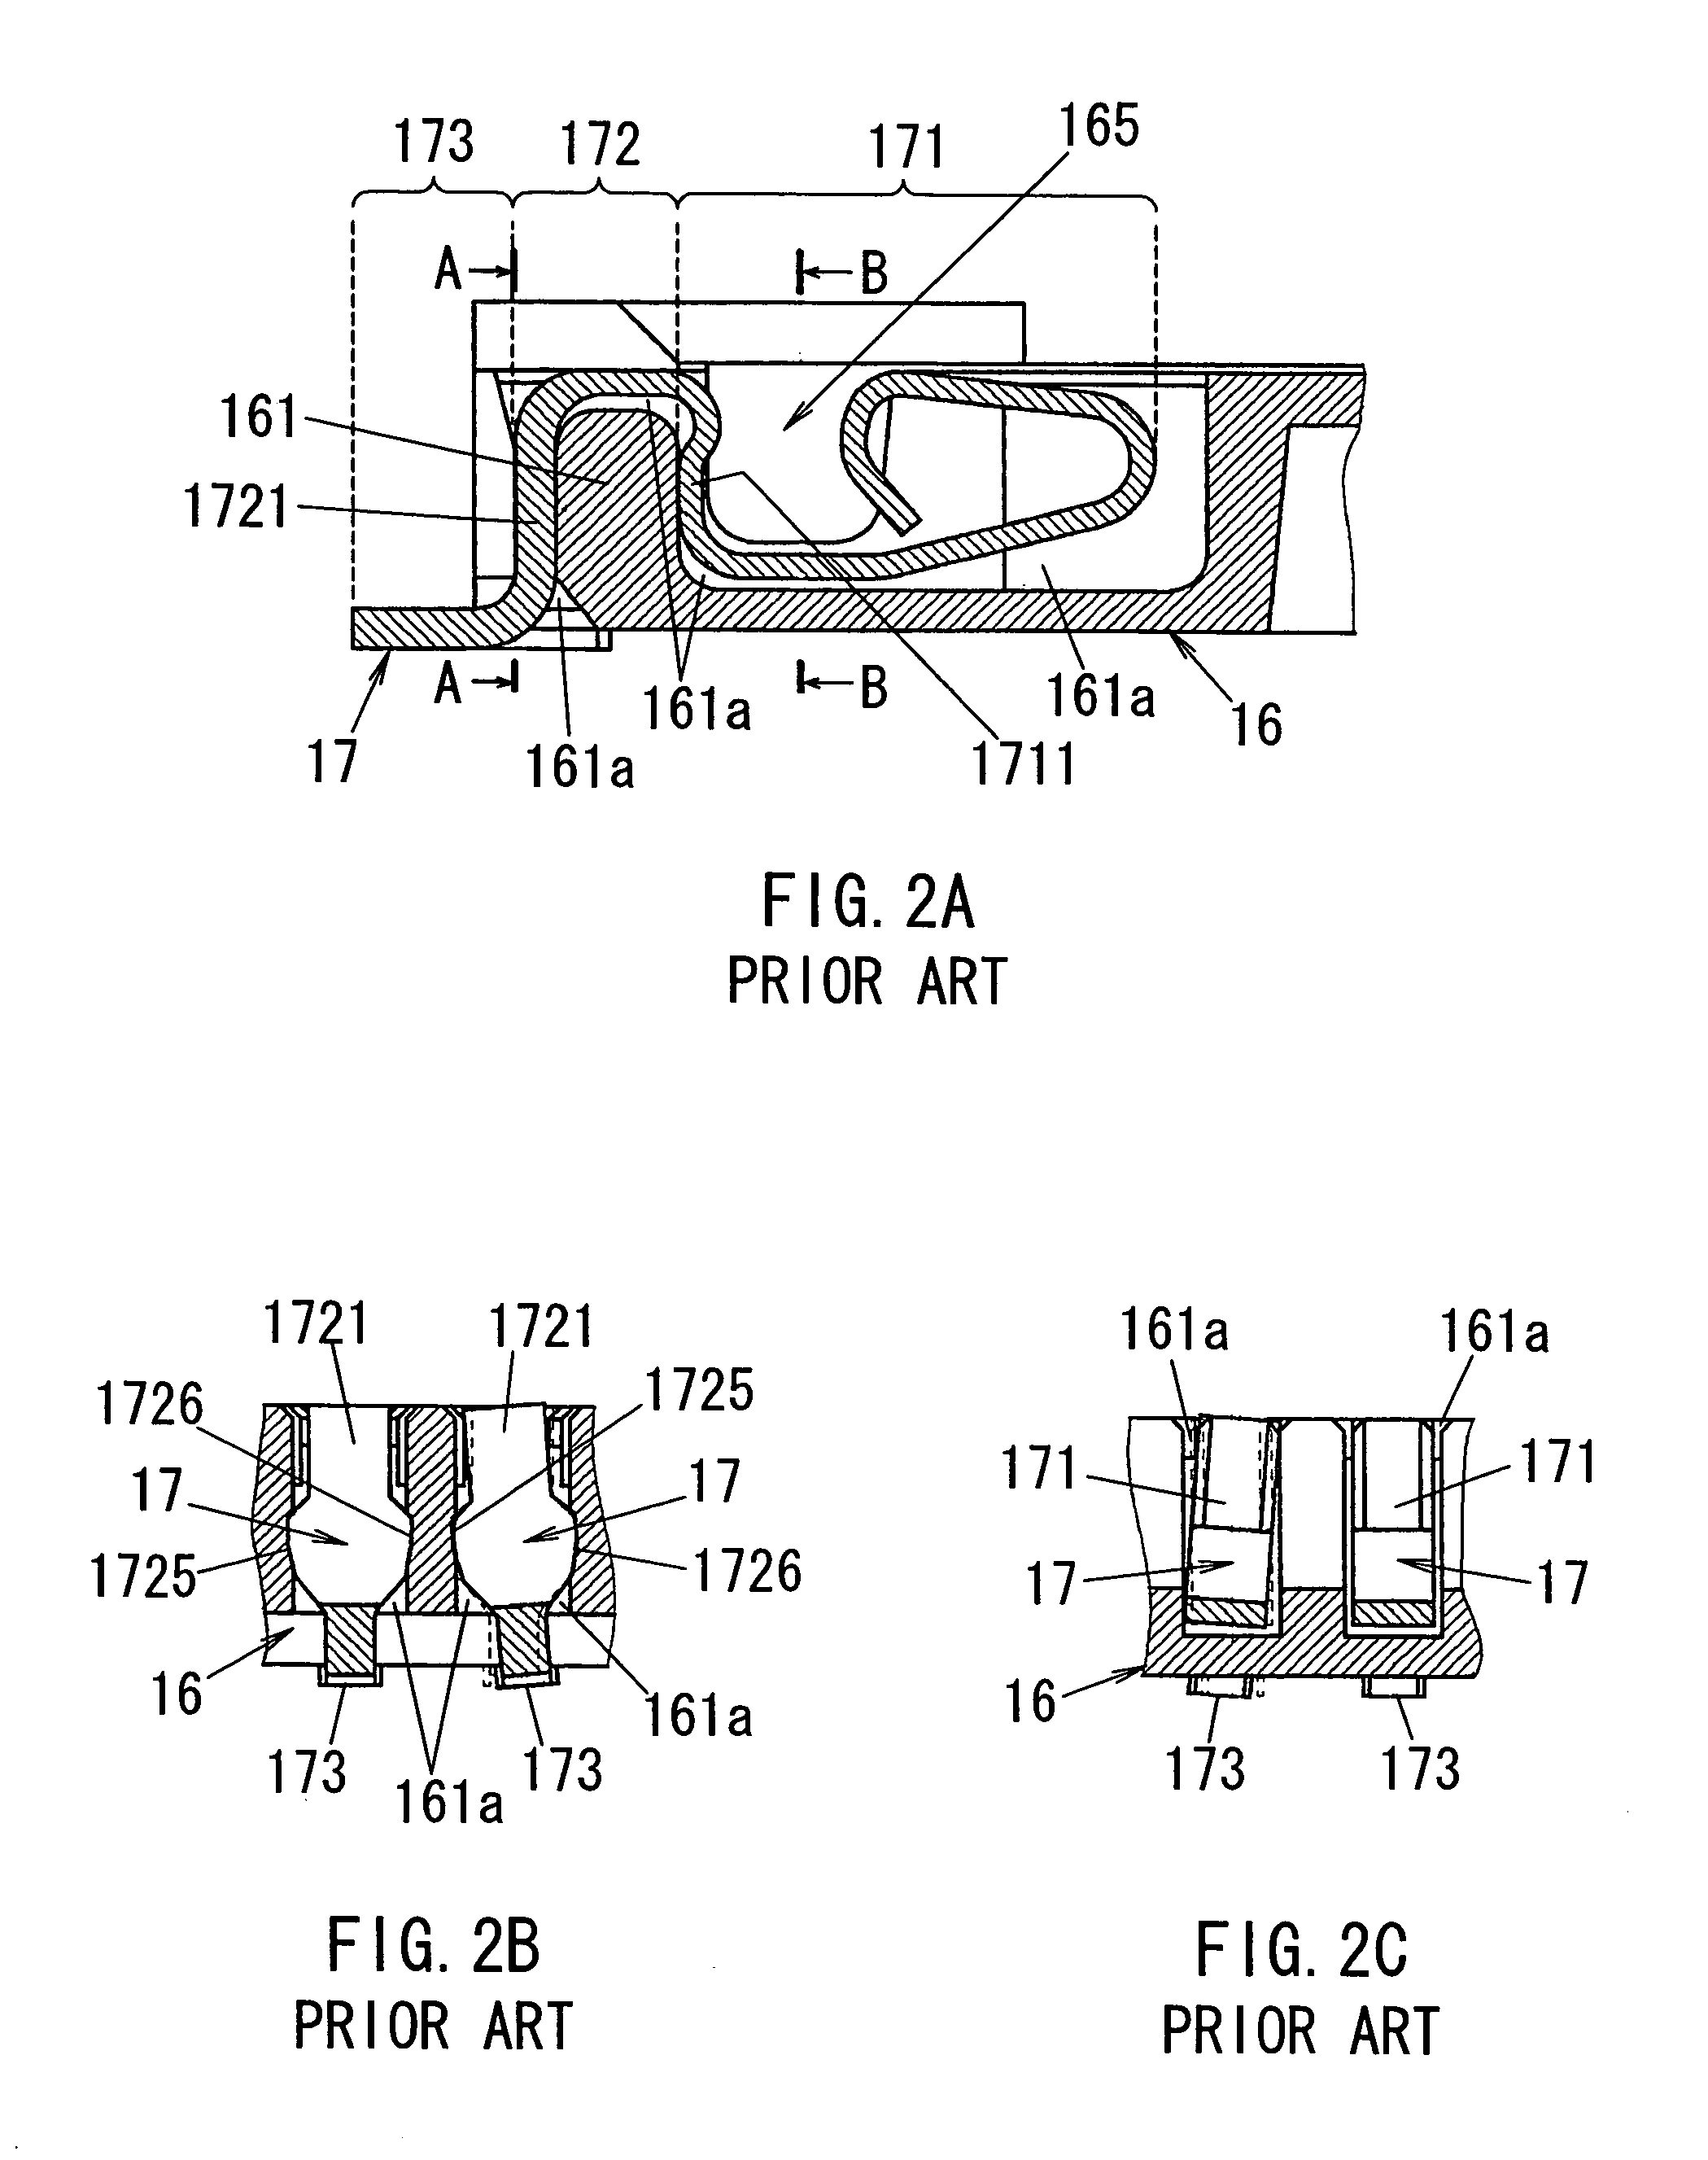 Connector with header connector and socket connector that are mechanically and electrically connected with each other